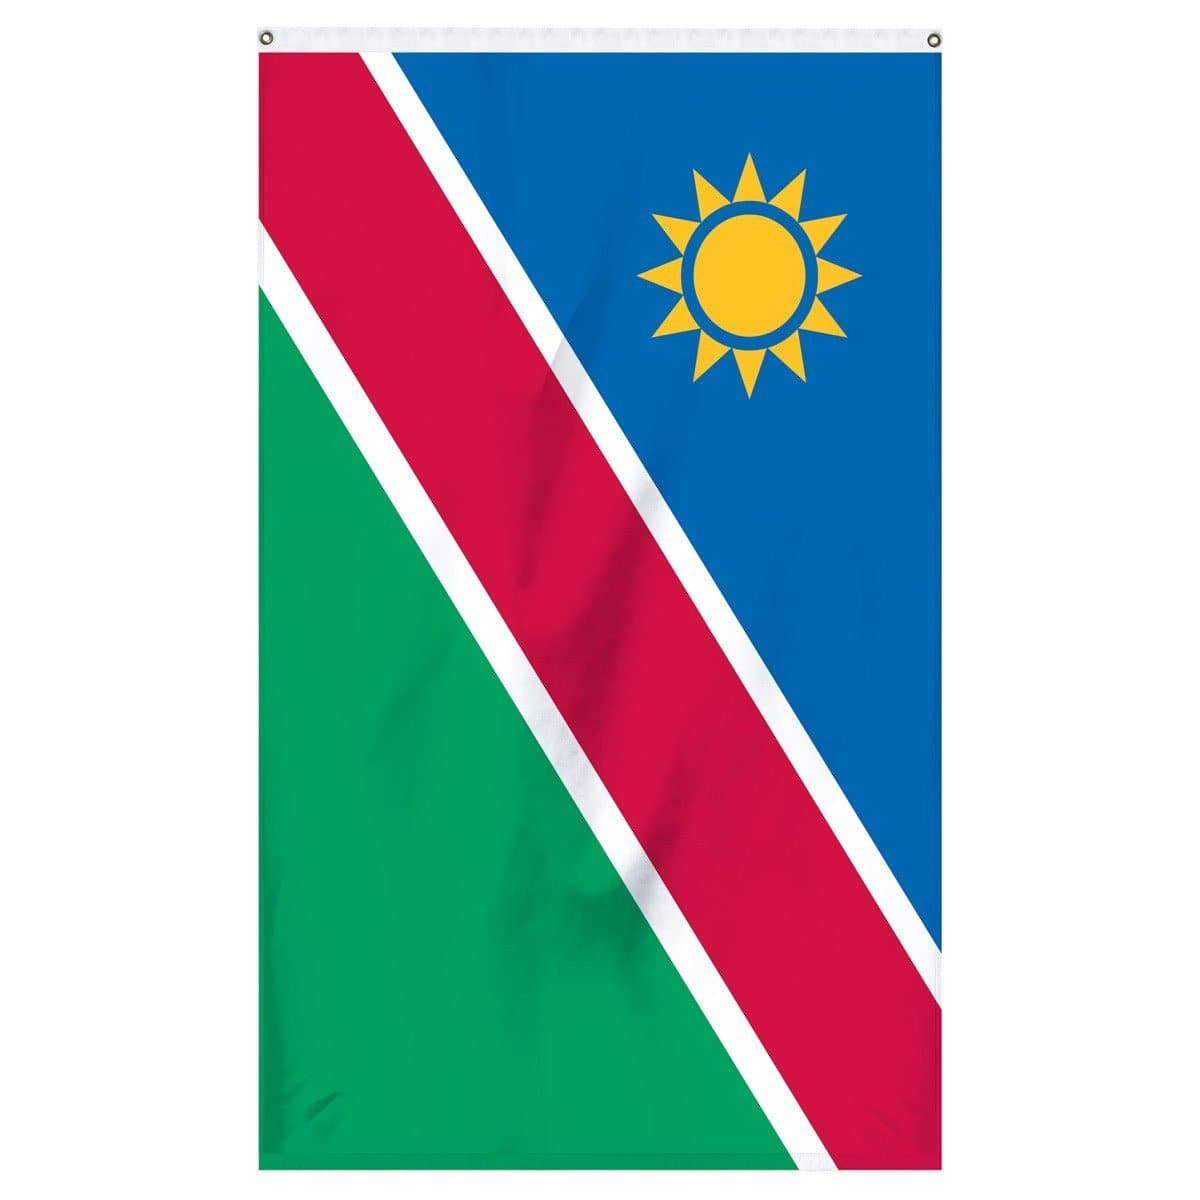 The national flag of Namibia for sale to buy online for your flagpole